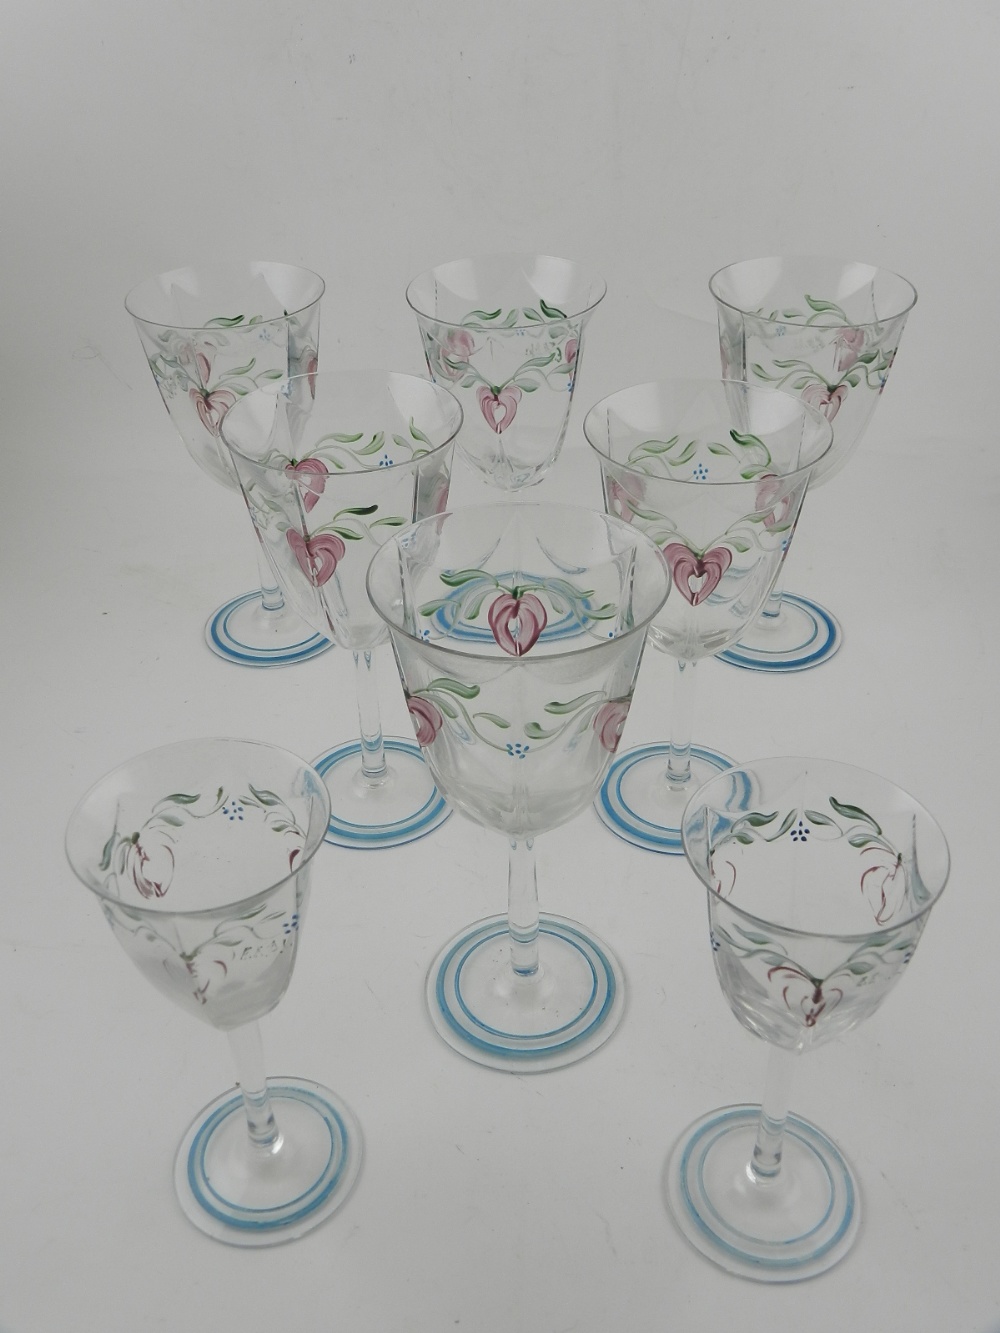 A collection of hand painted wine and sherry glasses.